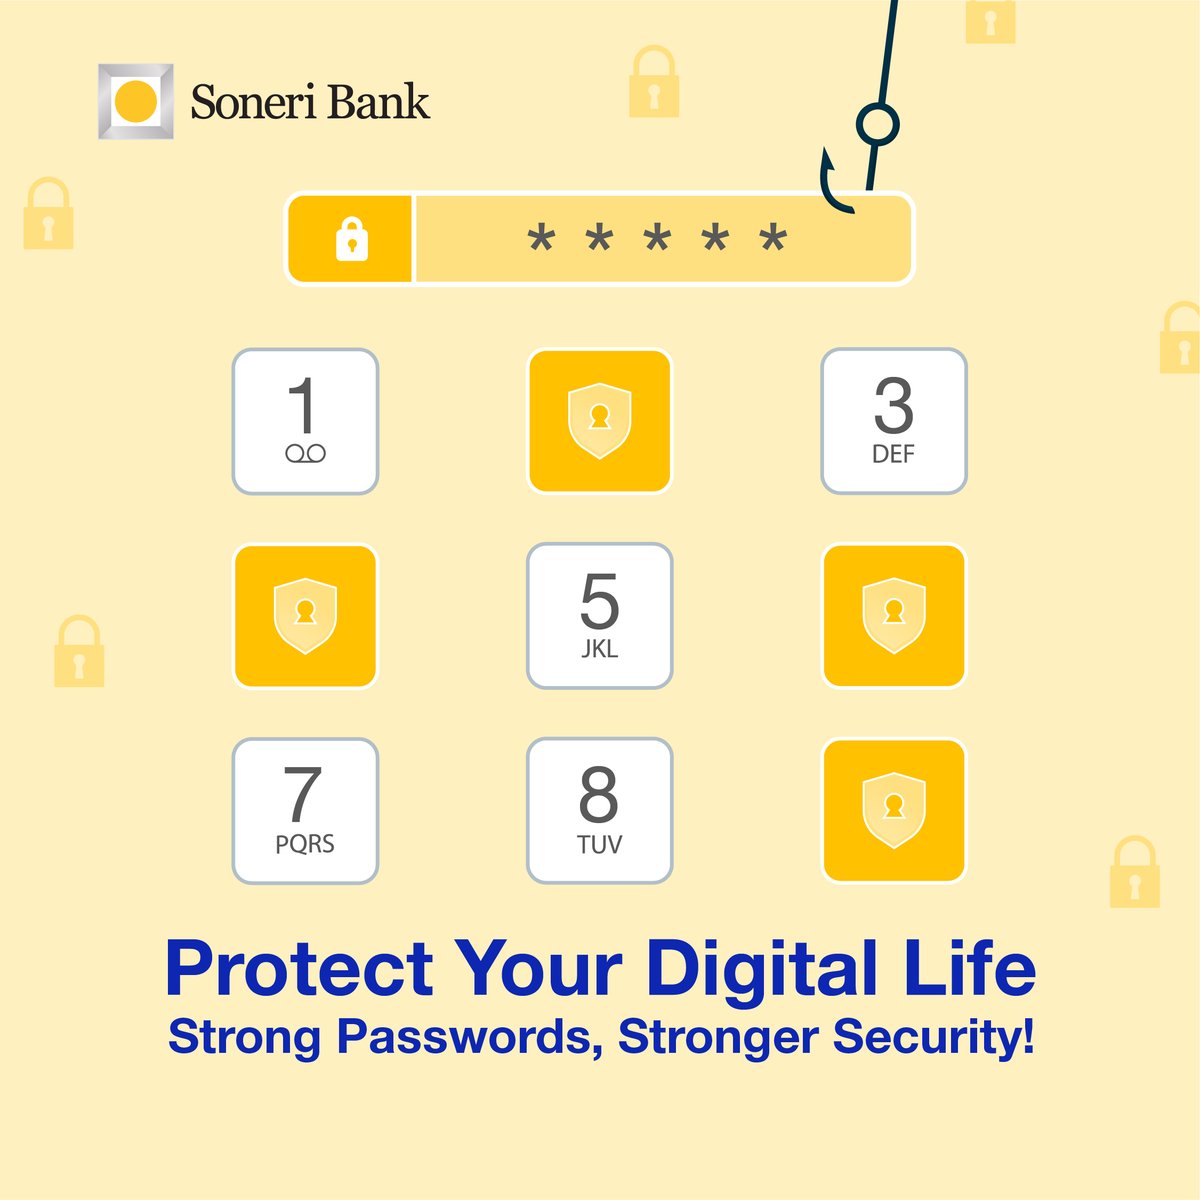 Secure your digital life and your bank account with a strong password. Avoid using personal details and update your passwords regularly for maximum security.

#SoneriBank #RoshanHarQadam #KnowYourRights #BeAlert #SecureBanking